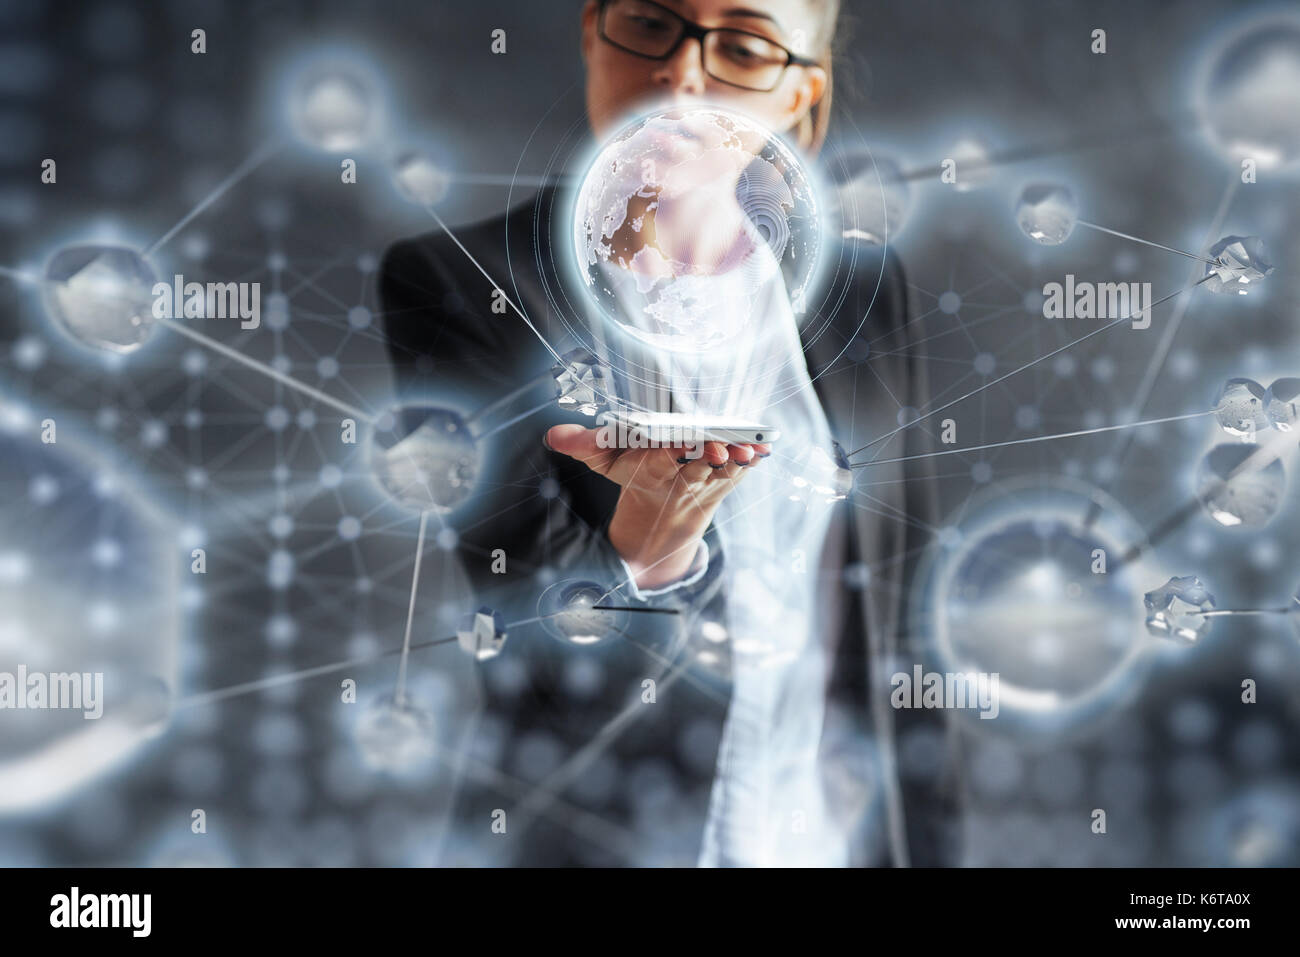 Innovative technologies in science and medicine. Technology to connect. The concept of security Stock Photo